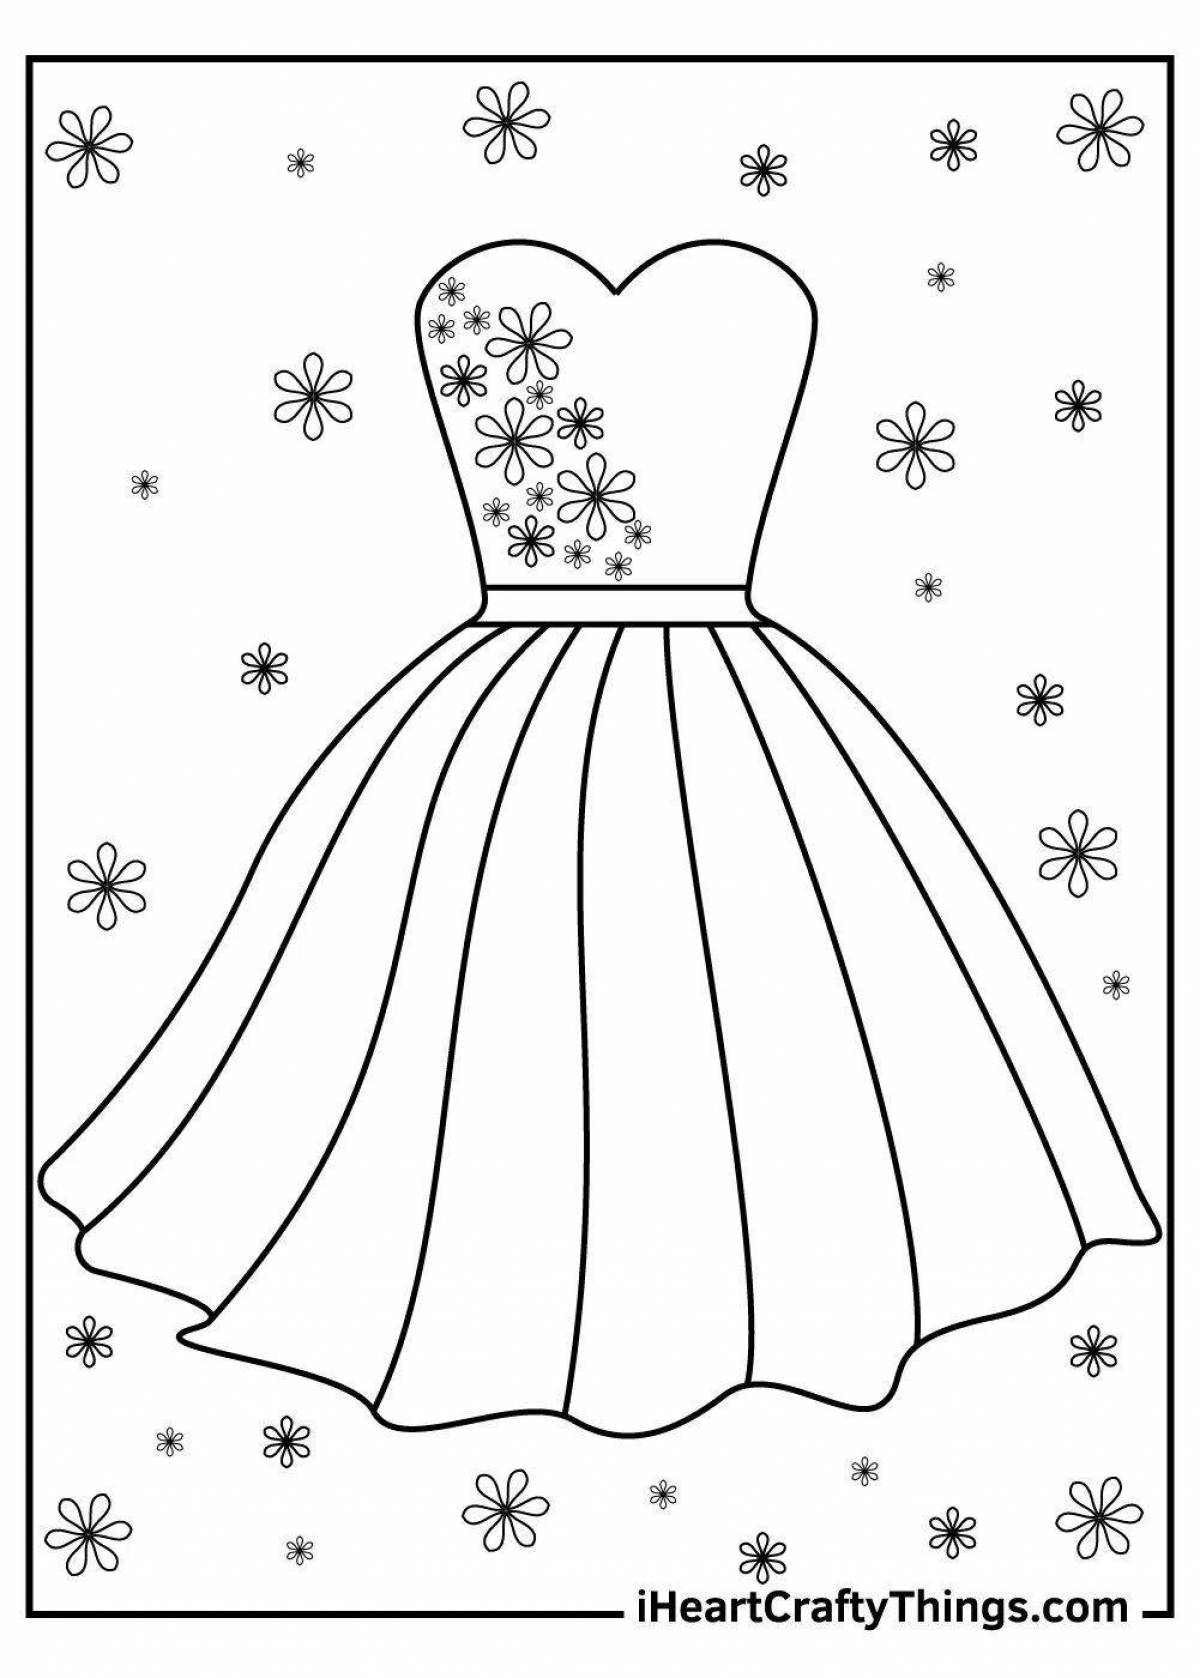 Coloring page cute dress for children 4-5 years old